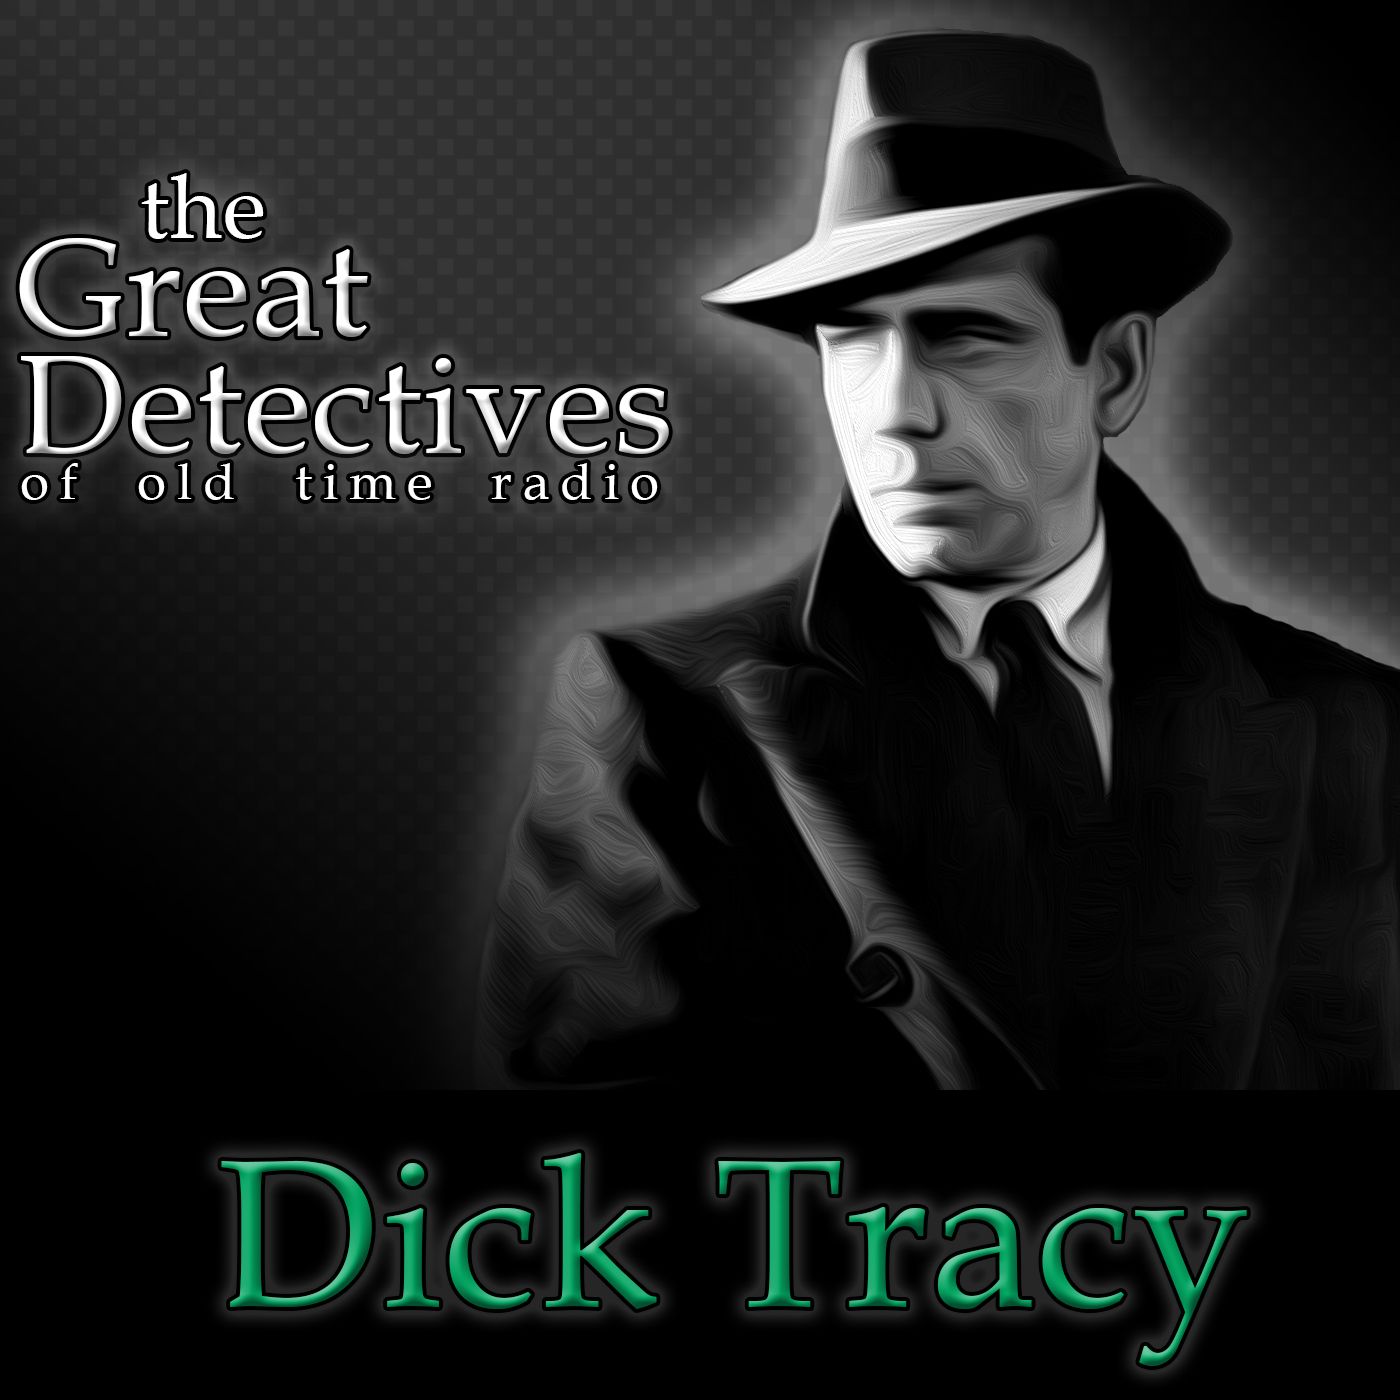 Dick Tracy – The Great Detectives of Old Time Radio